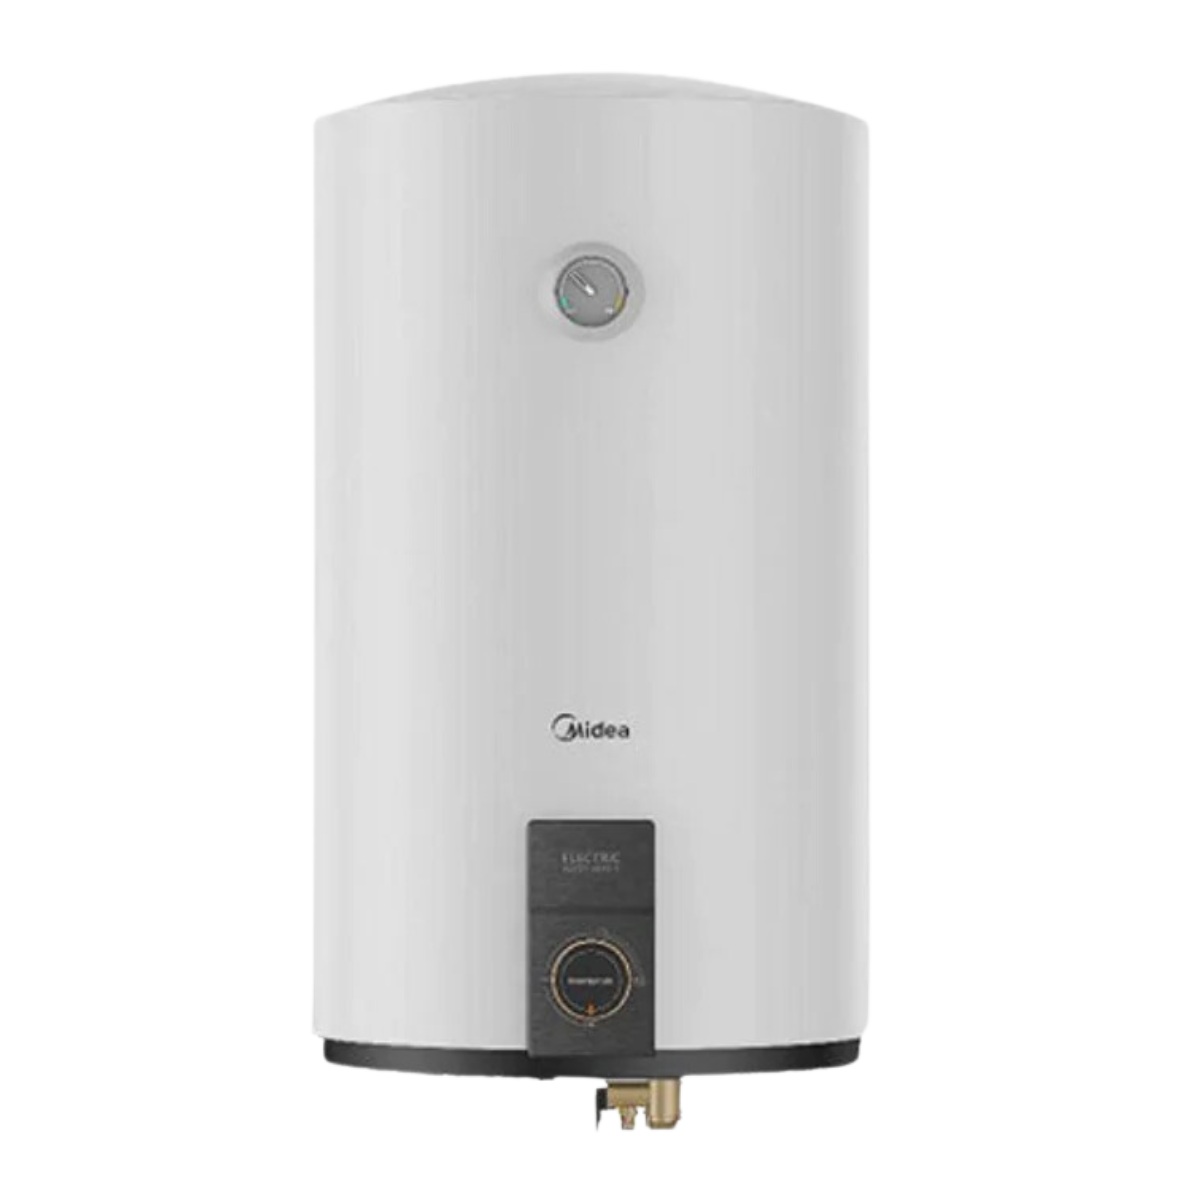 MIDEA  D10015FN  ELECTRIC STORAGE  WATER HEATER 100LTS